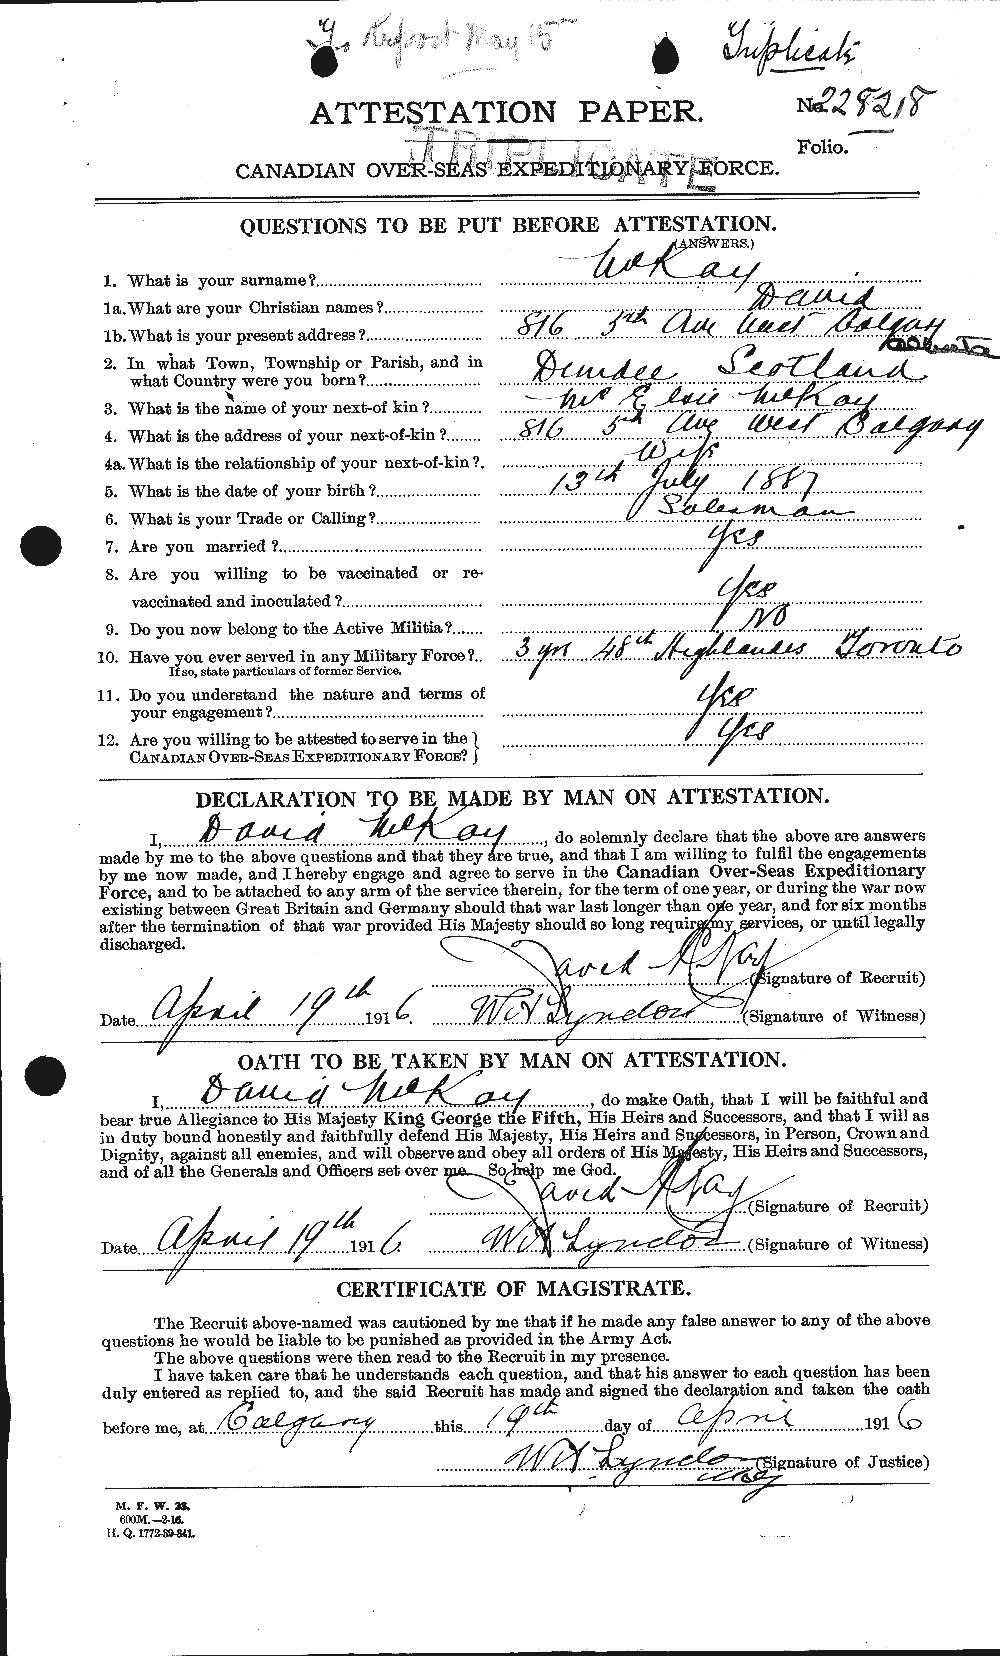 Personnel Records of the First World War - CEF 531135a